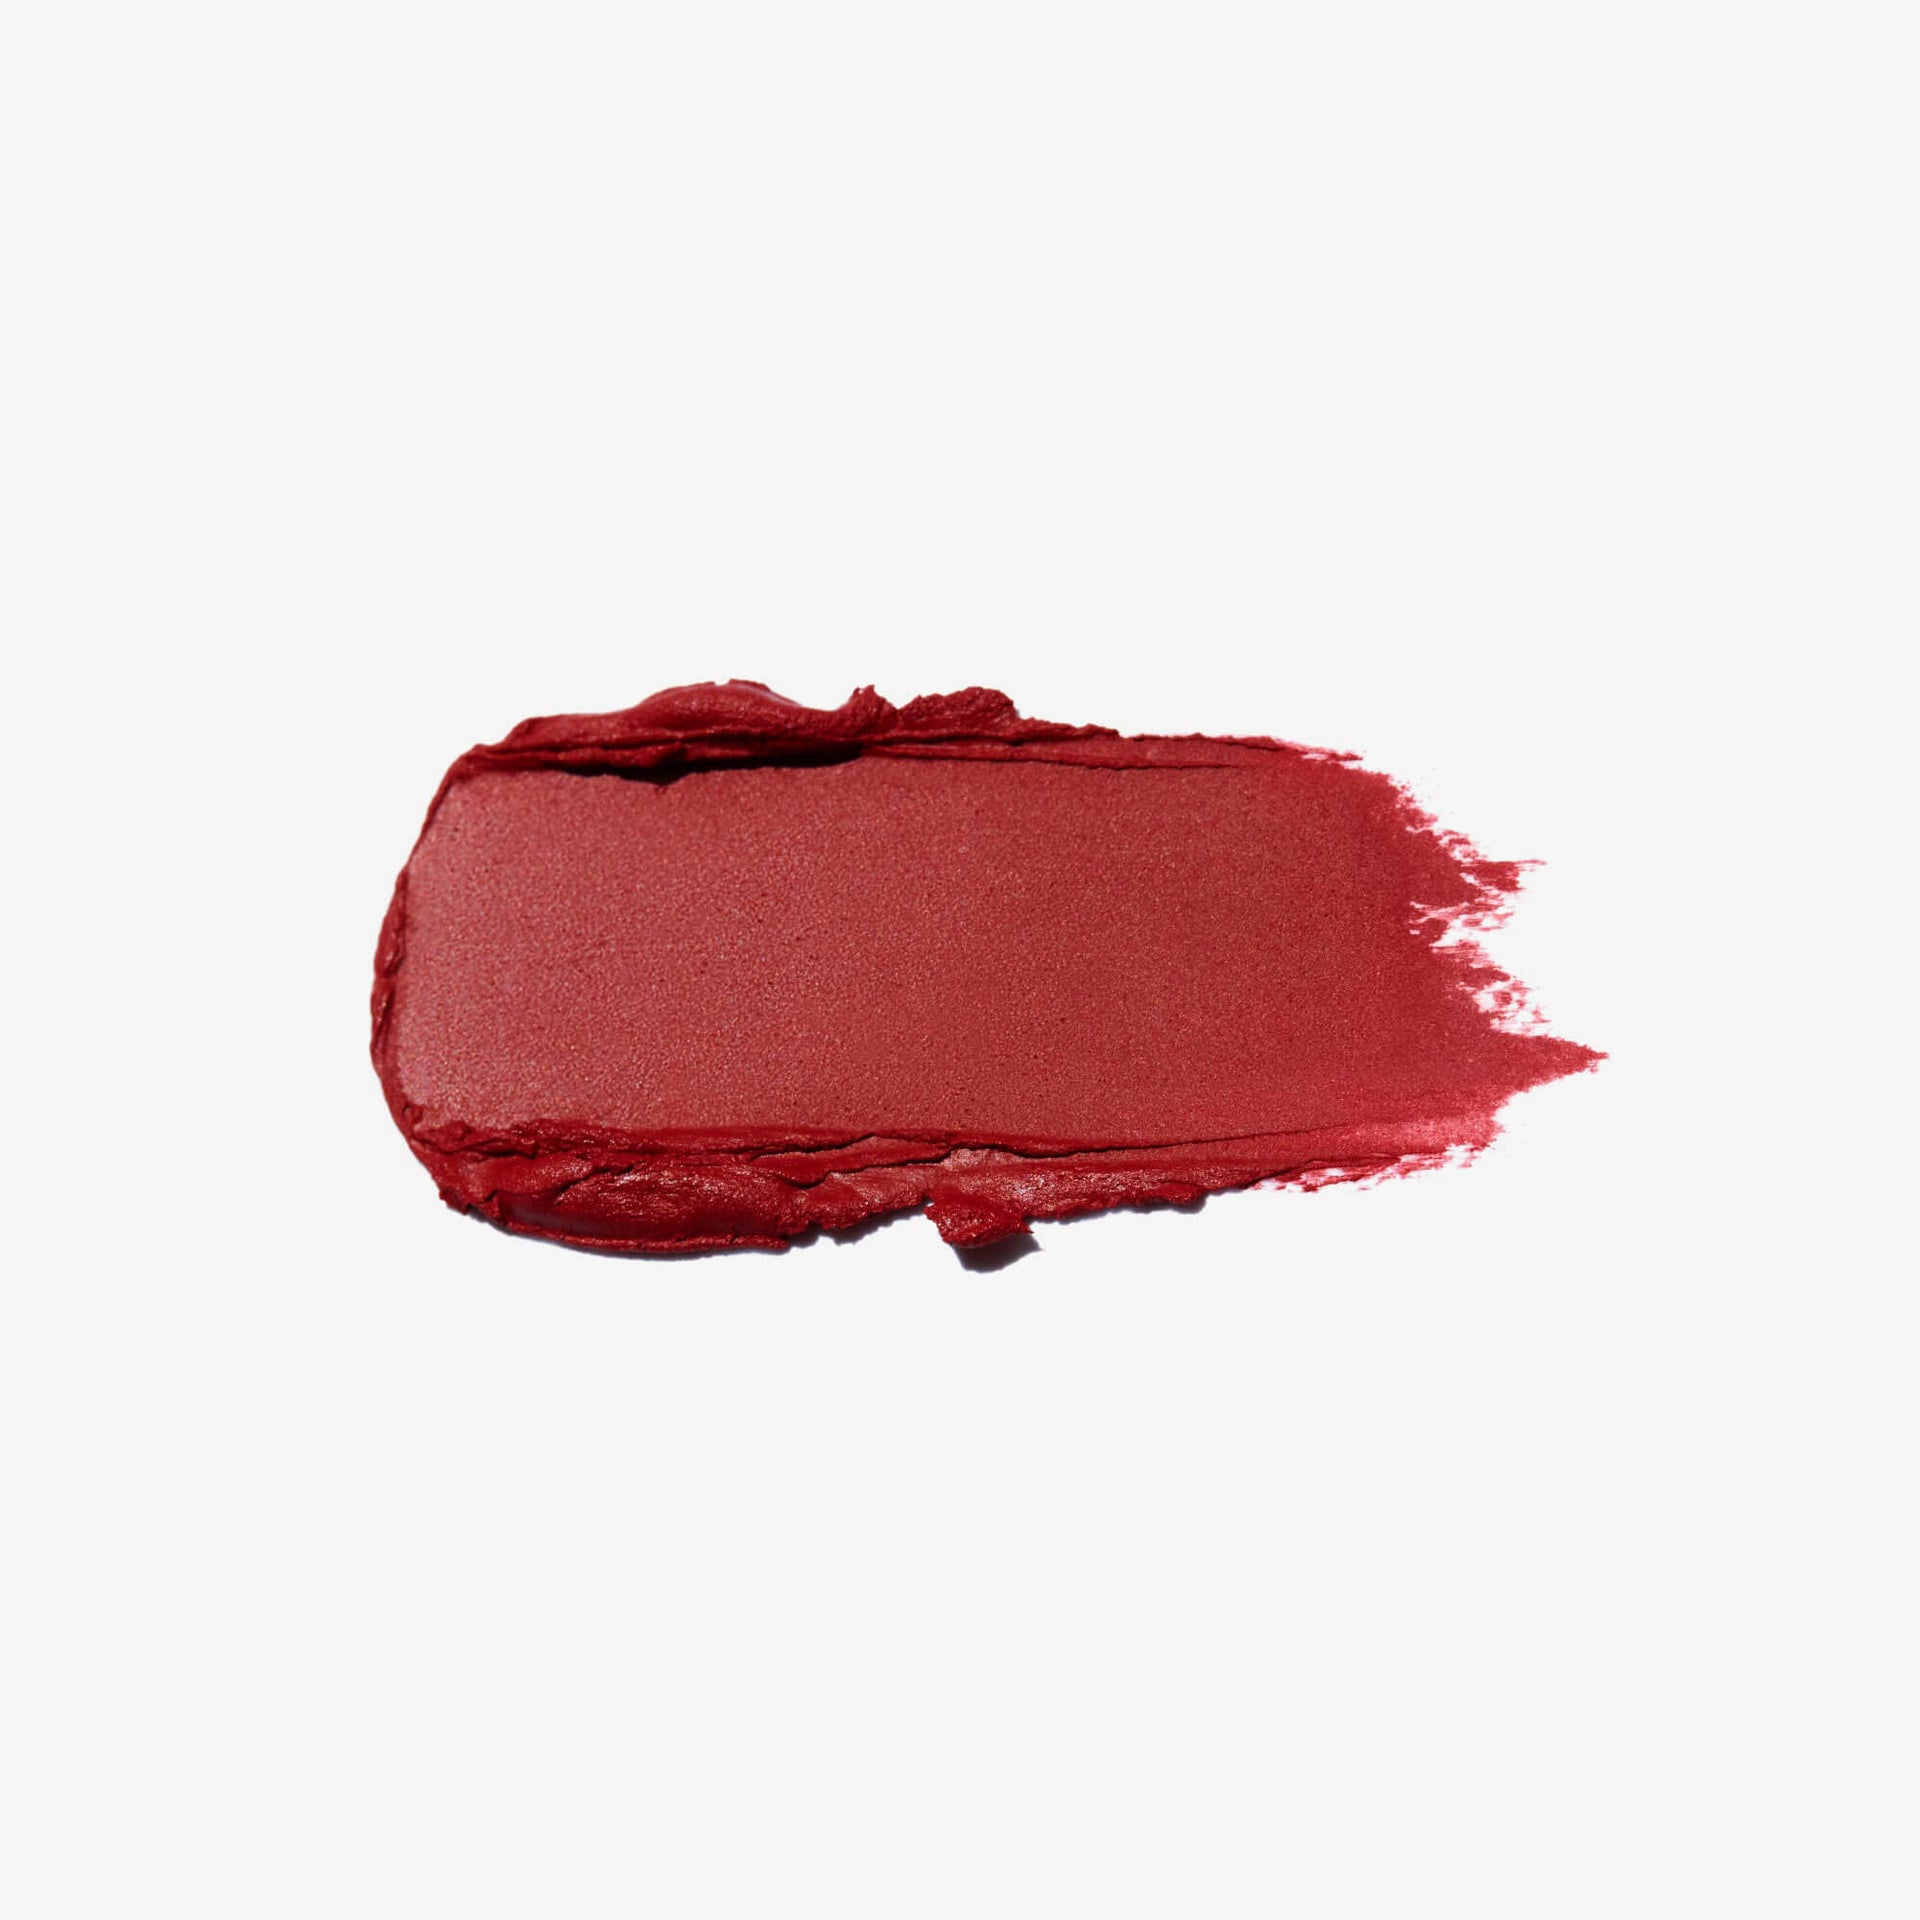 Lychee |Limited Edition Satin Lipstick Swatch Shade Lychee